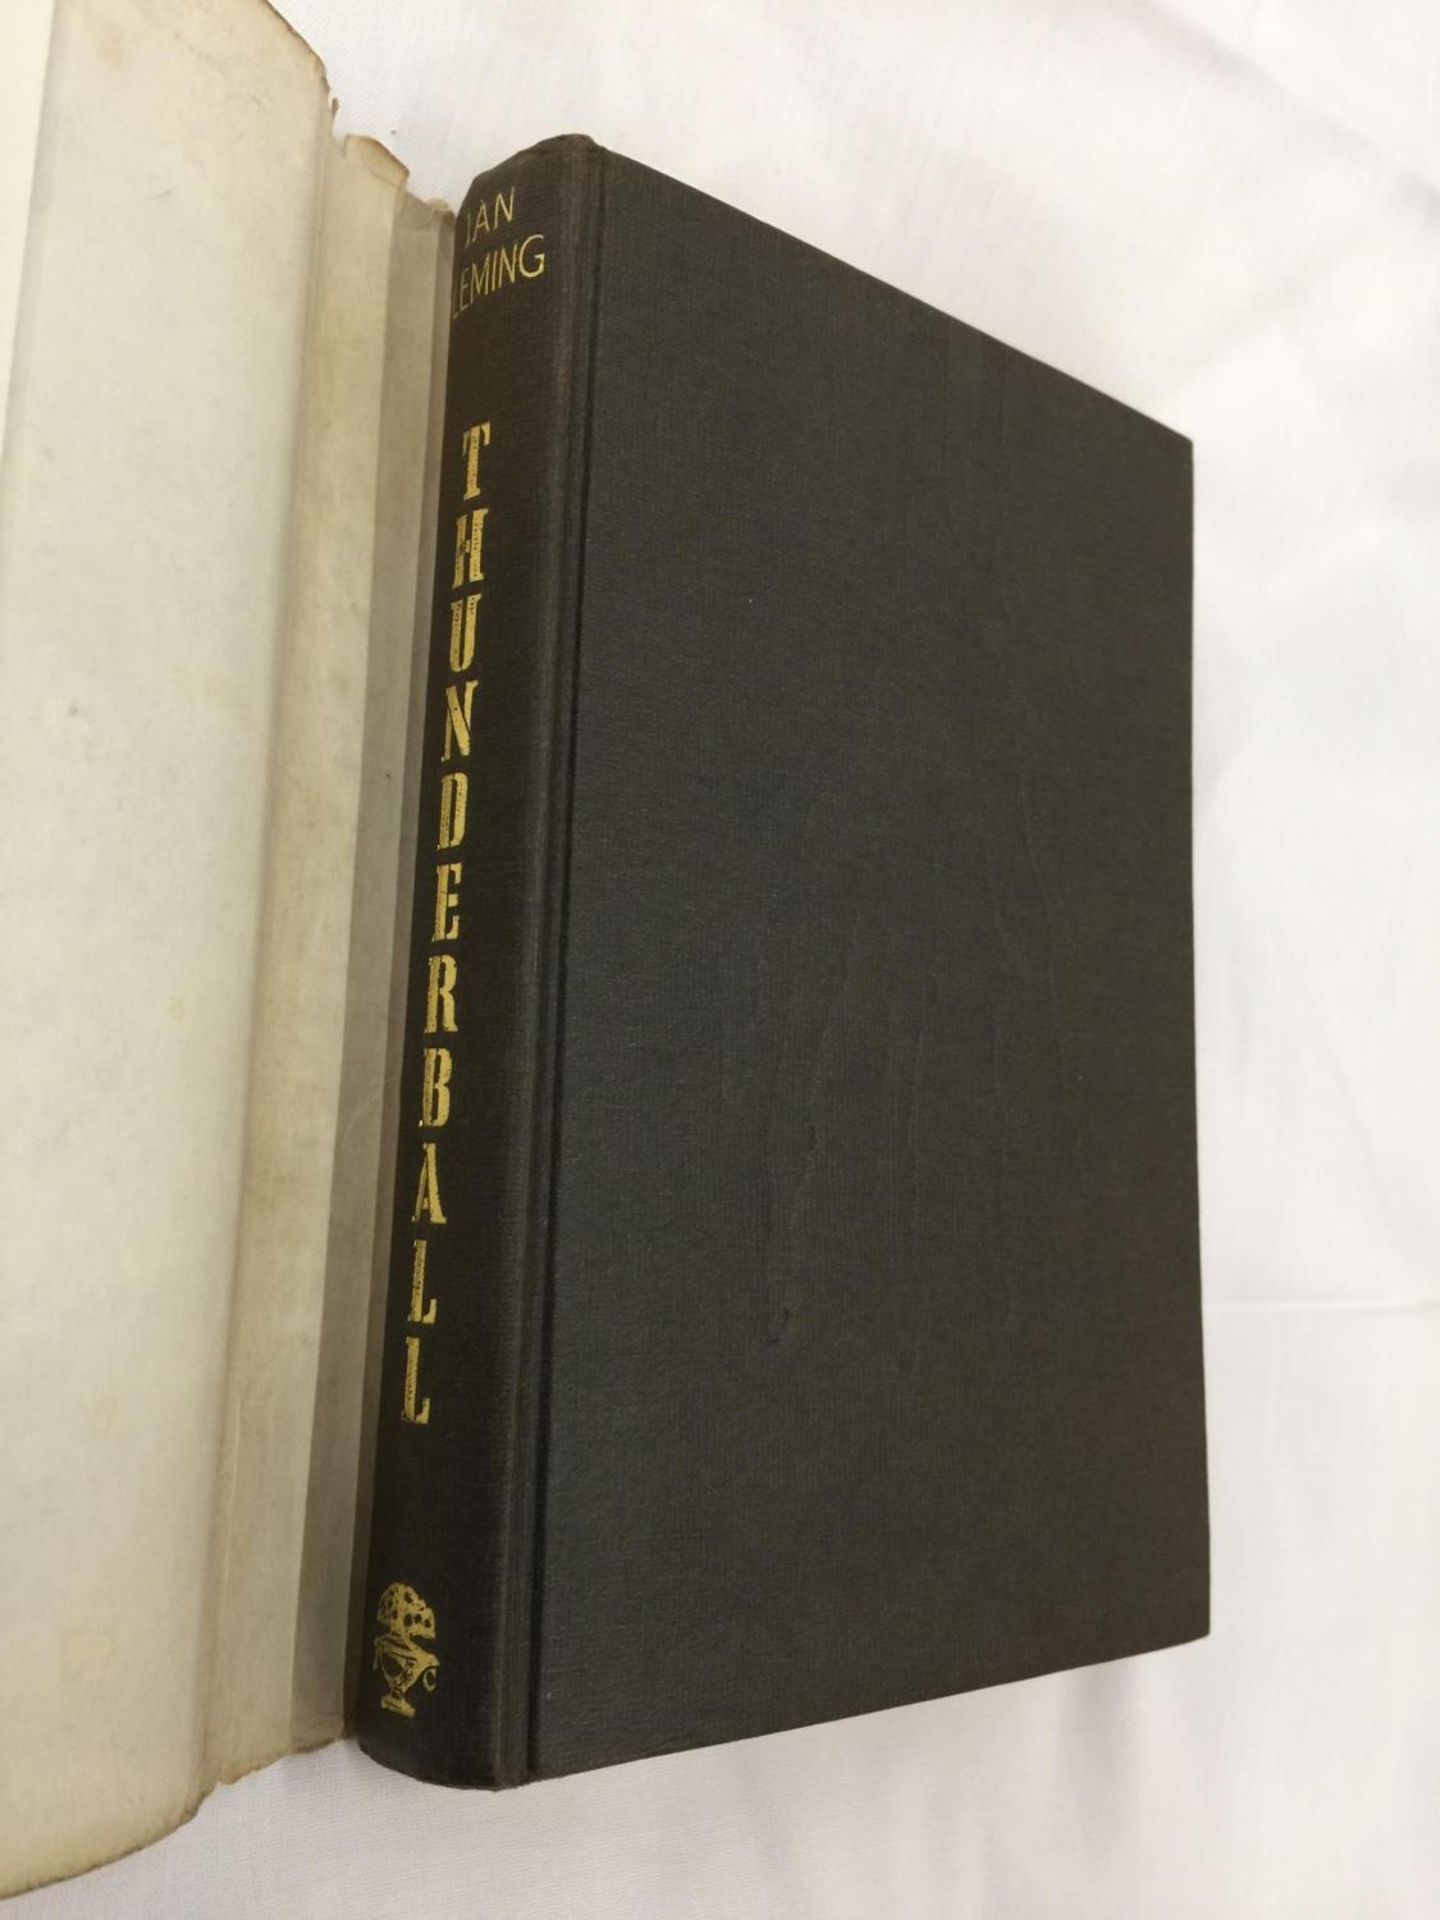 A FIRST EDITION JAMES BOND NOVEL - THUNDERBALL BY IAN FLEMING, HARDBACK WITH ORIGINAL DUST - Image 8 of 10